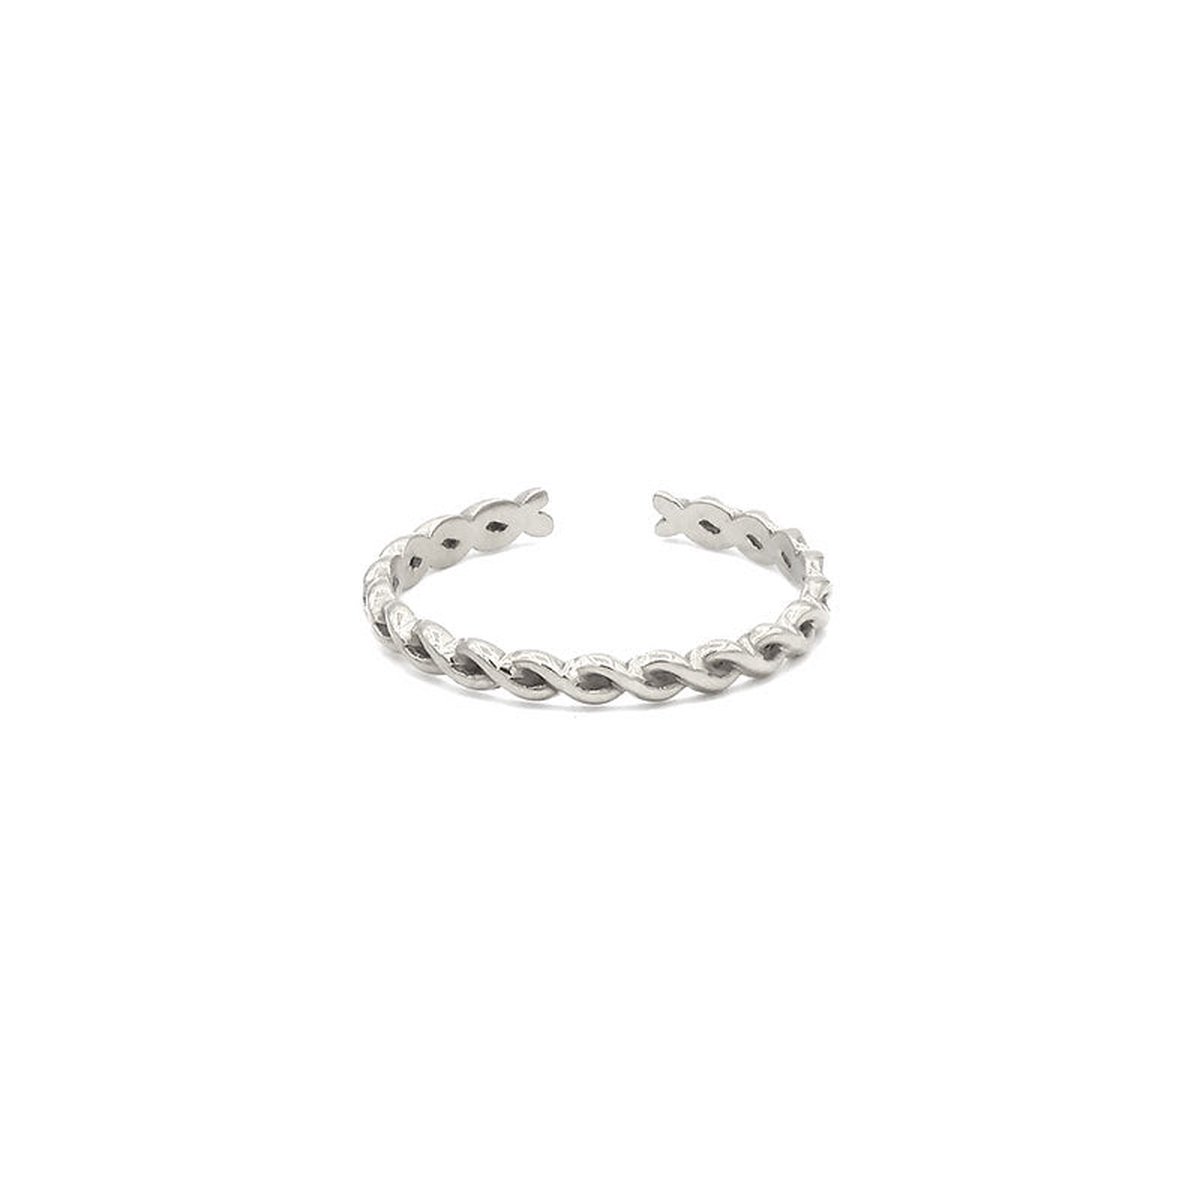 Mint15 Verstelbare ring 'Twisted' - Zilver RVS/Stainless Steel